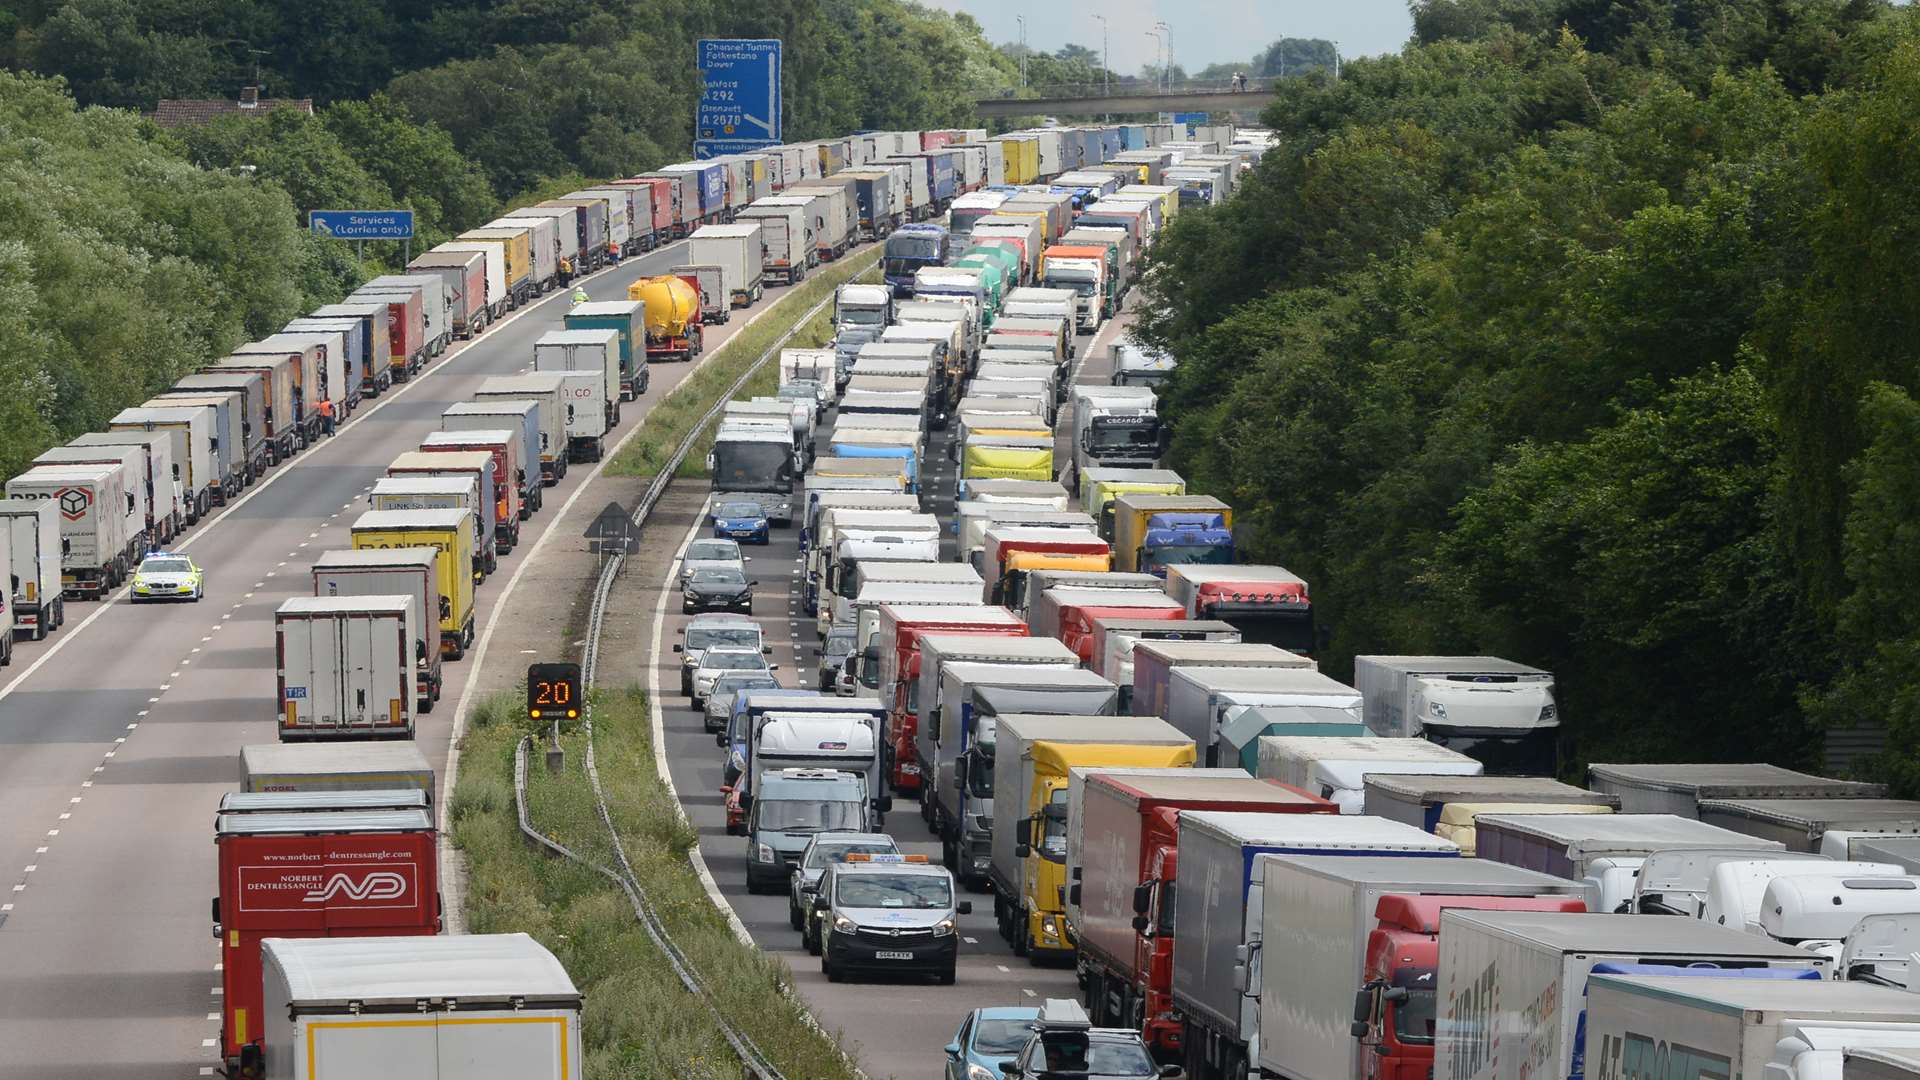 Operation Stack causing queues on the M20